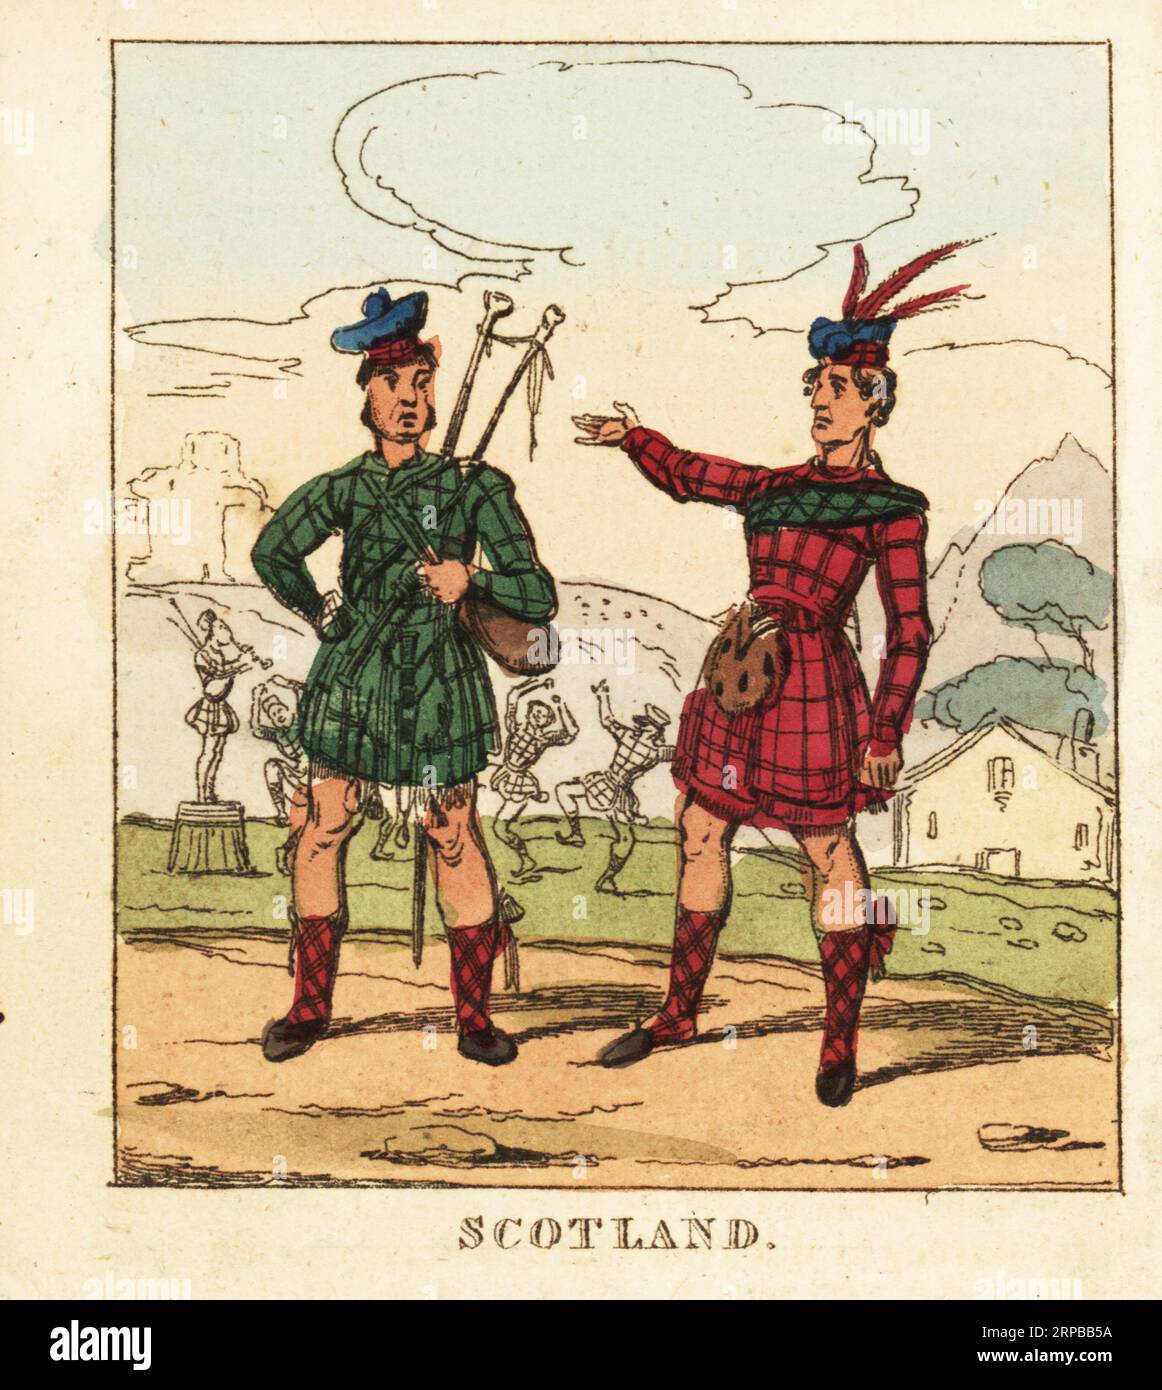 Costumes of Scottish highlanders, 19th century. A piper in tartan jacket and kilt with bagpipes. Another man in plumed hat, tartan kilt and sporran. Men dancing a highland fling in the background. Scotland. Handcoloured copperplate engraving from The World in Miniature, or Panorama of the Costumes, Manners & Customs of All Nations, John Bysh, London, 1825. Stock Photo